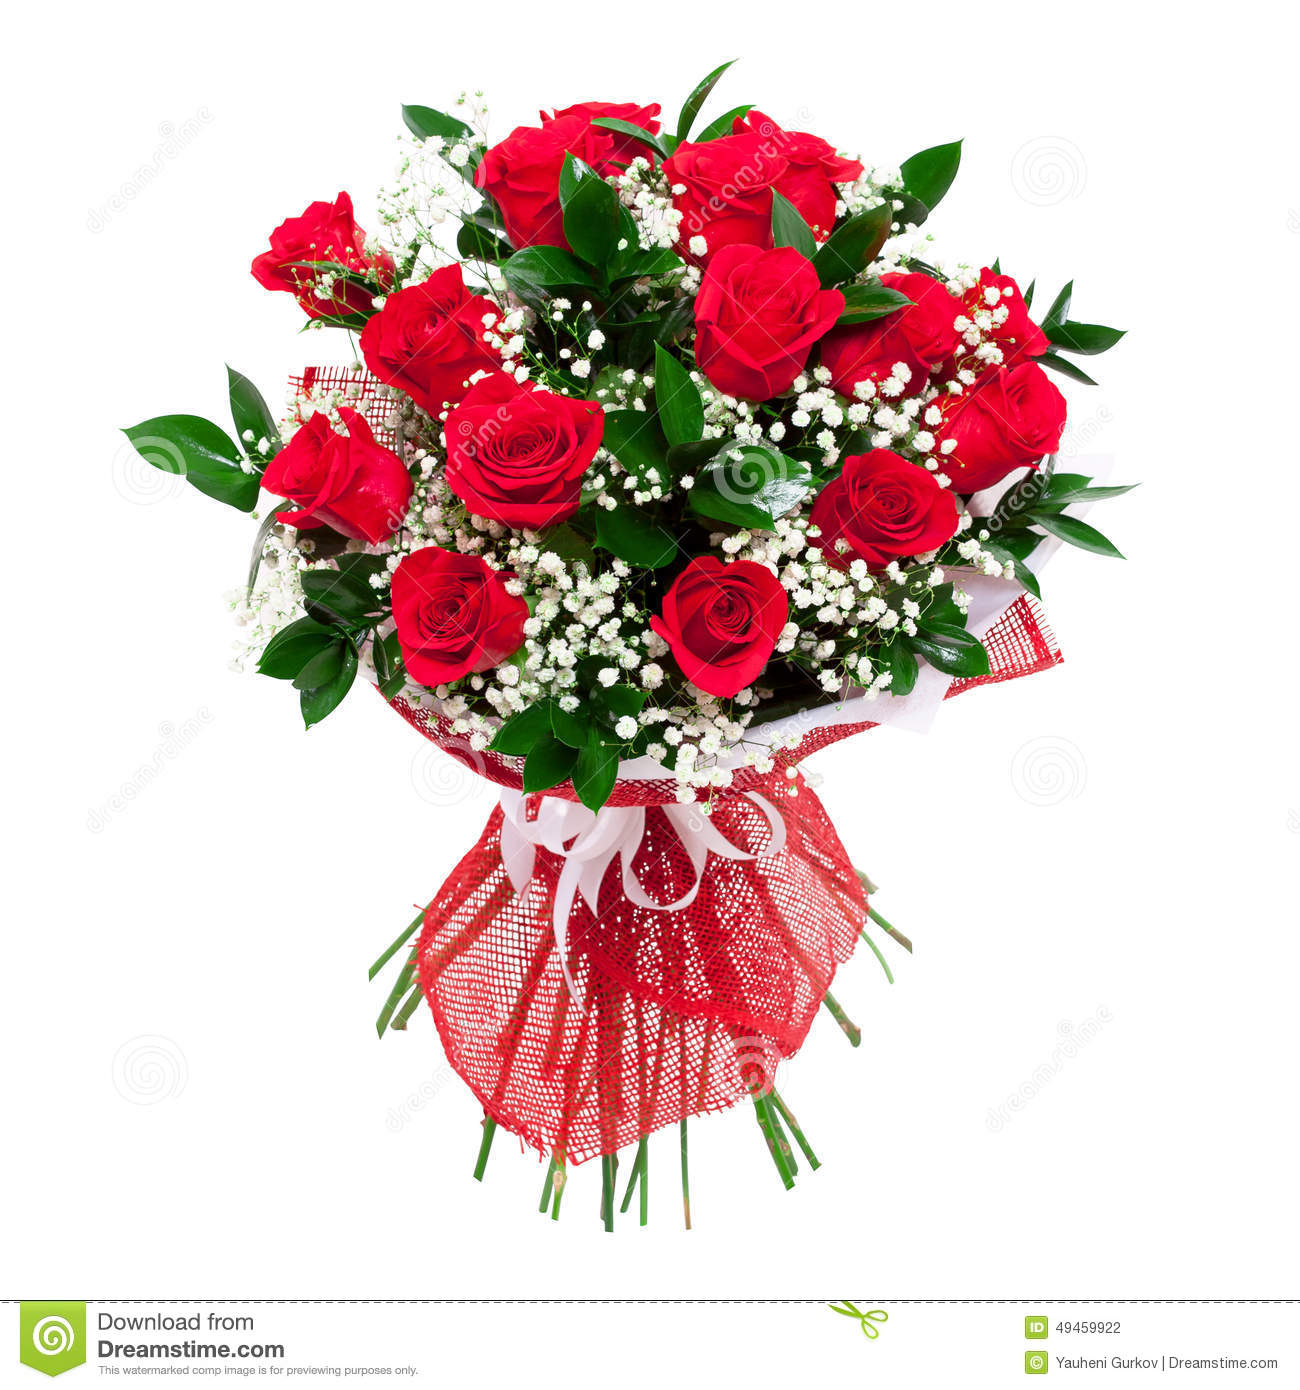 Red Roses Bouquet  Colorful And Bright  Isolated On White Background